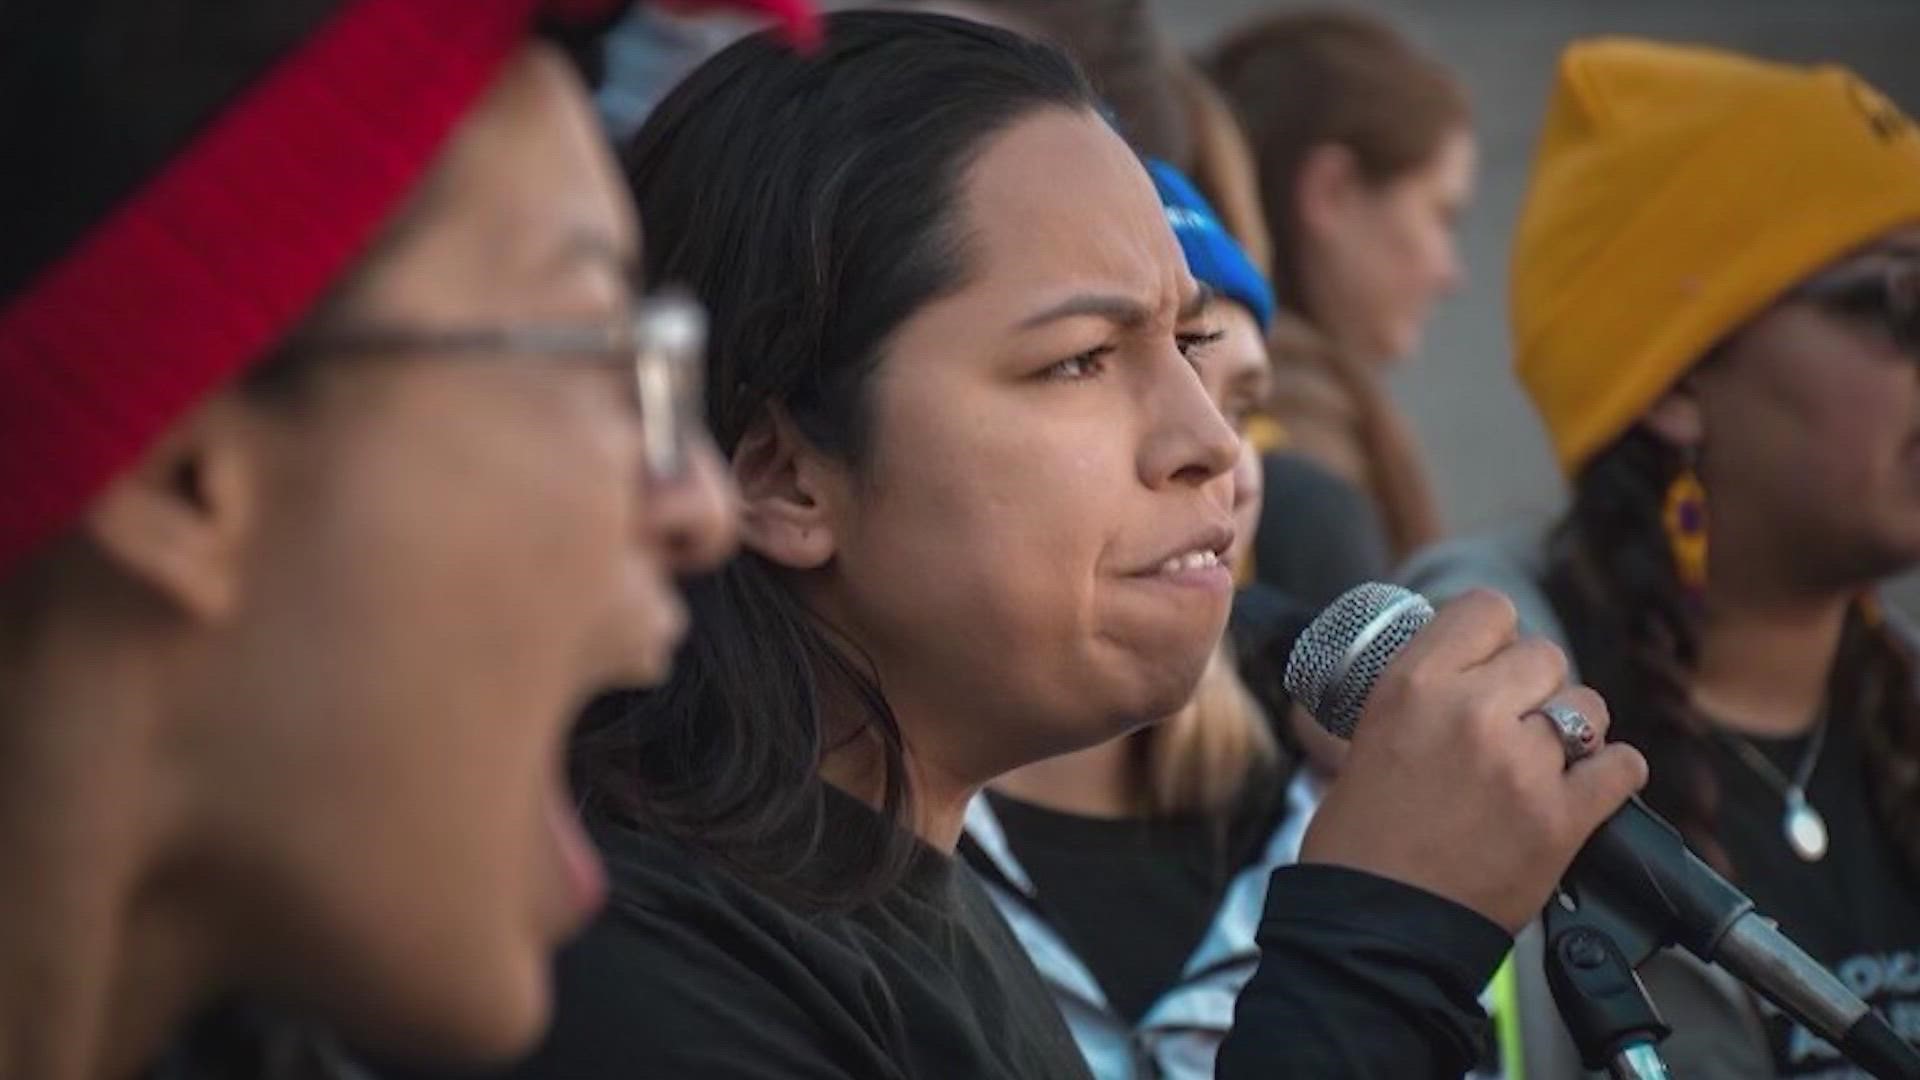 "Humanity is not defined by a piece of paper," says Sandra Avalos. Without DACA, she would lose her right to work and could be separated from her daughter.